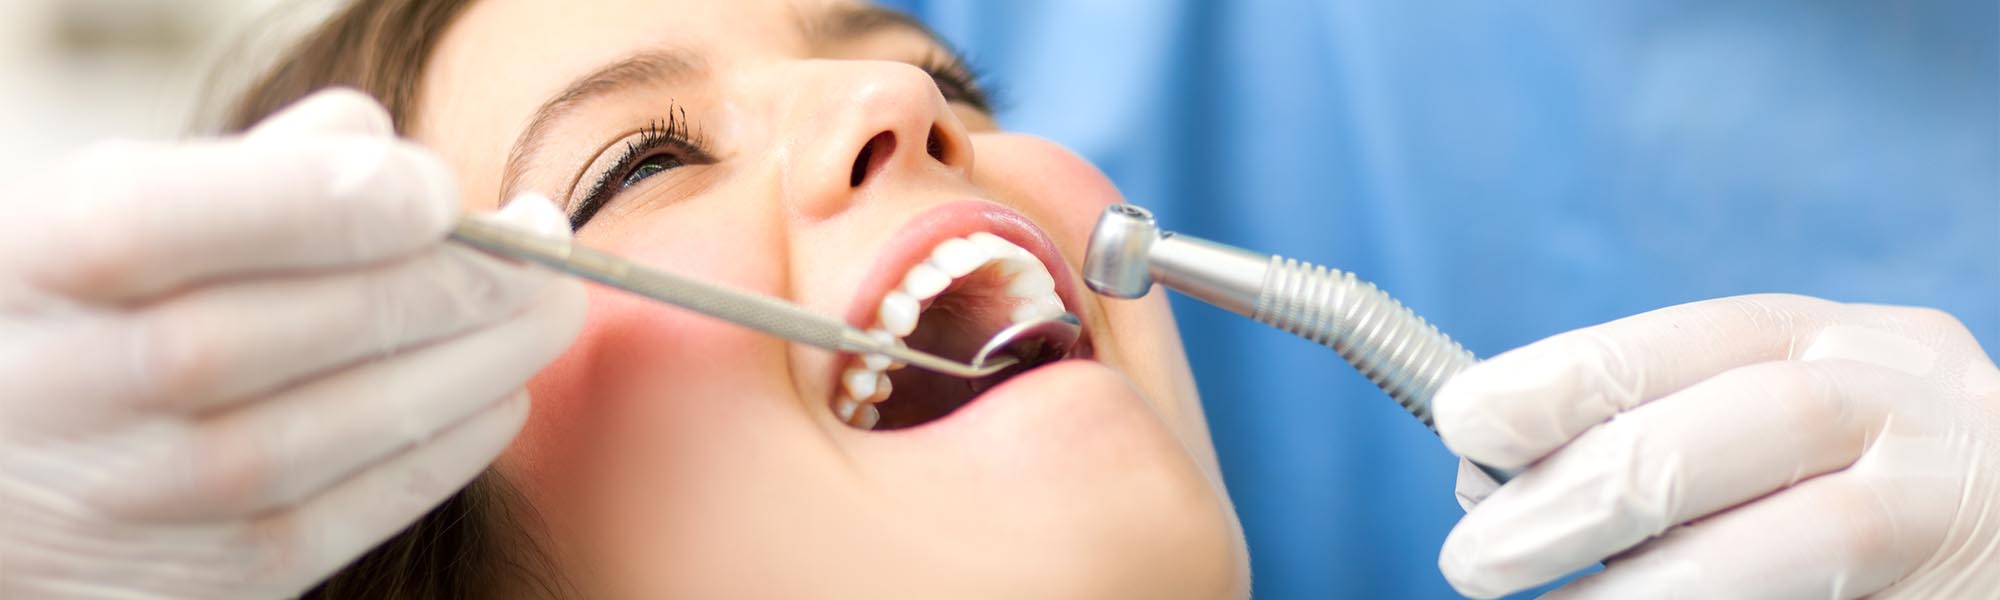 Routine Teeth Cleaning in Torrance CA